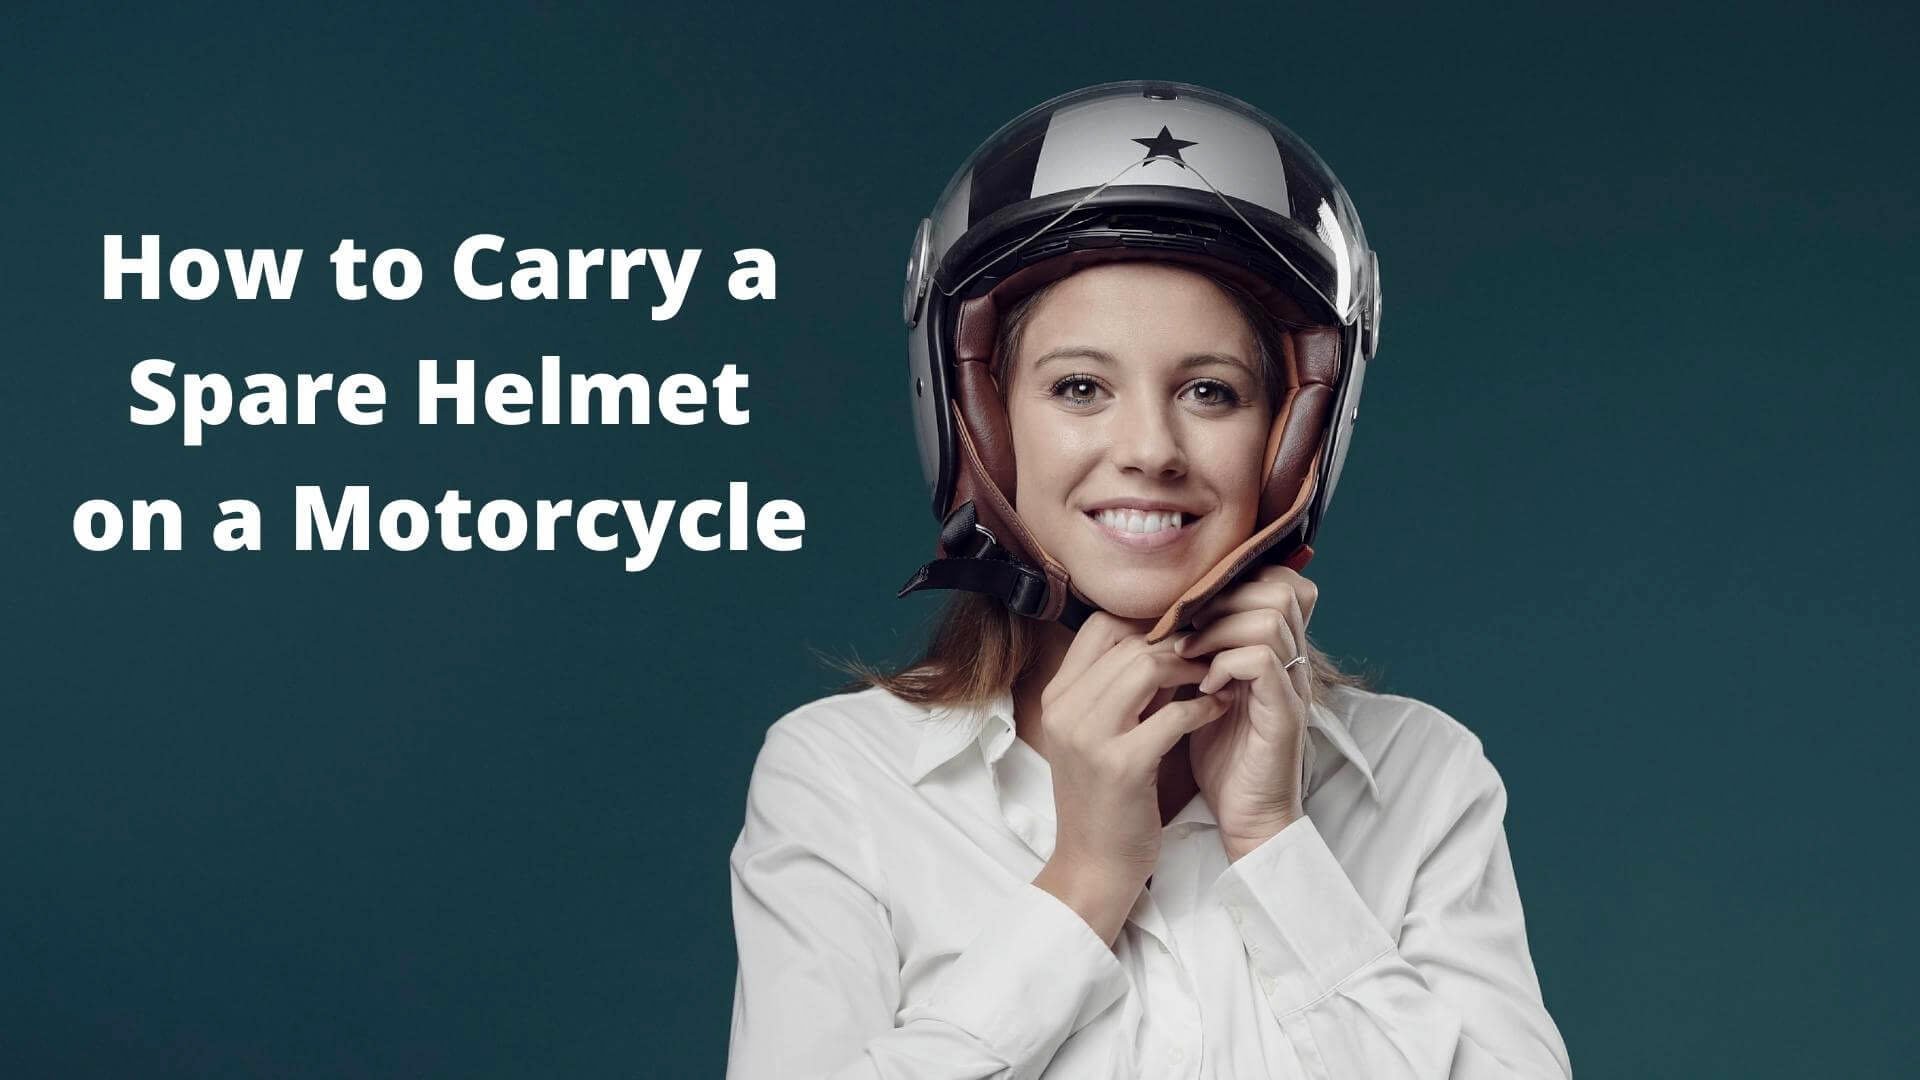 How to carry a spare helmet on a motorcycle?